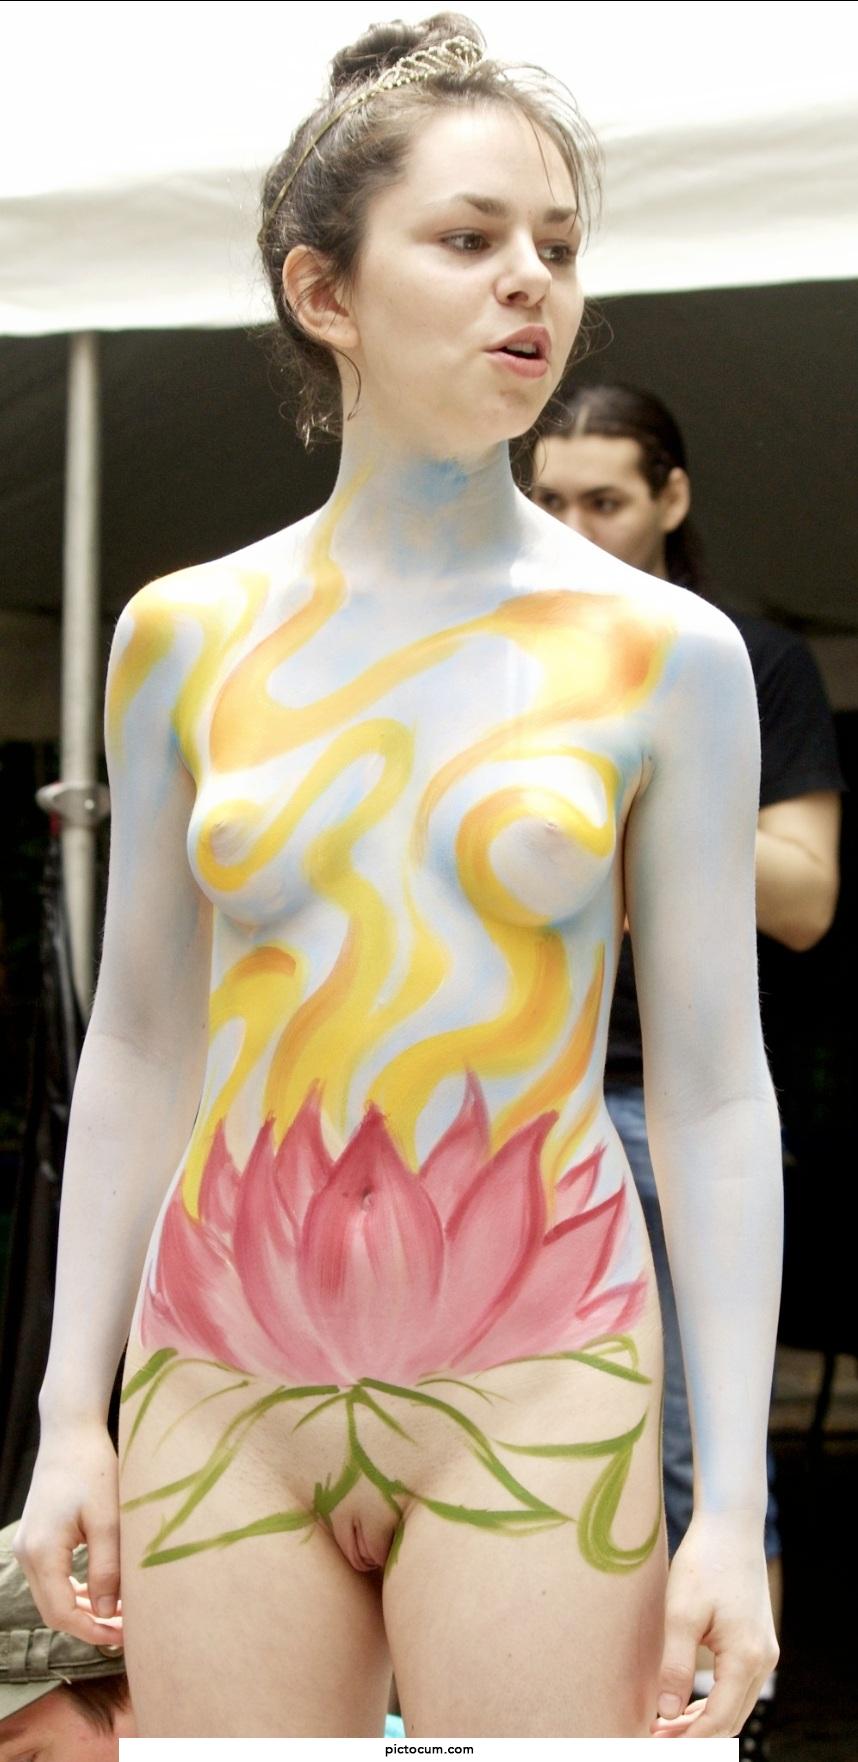 NYC bodypainting day chick